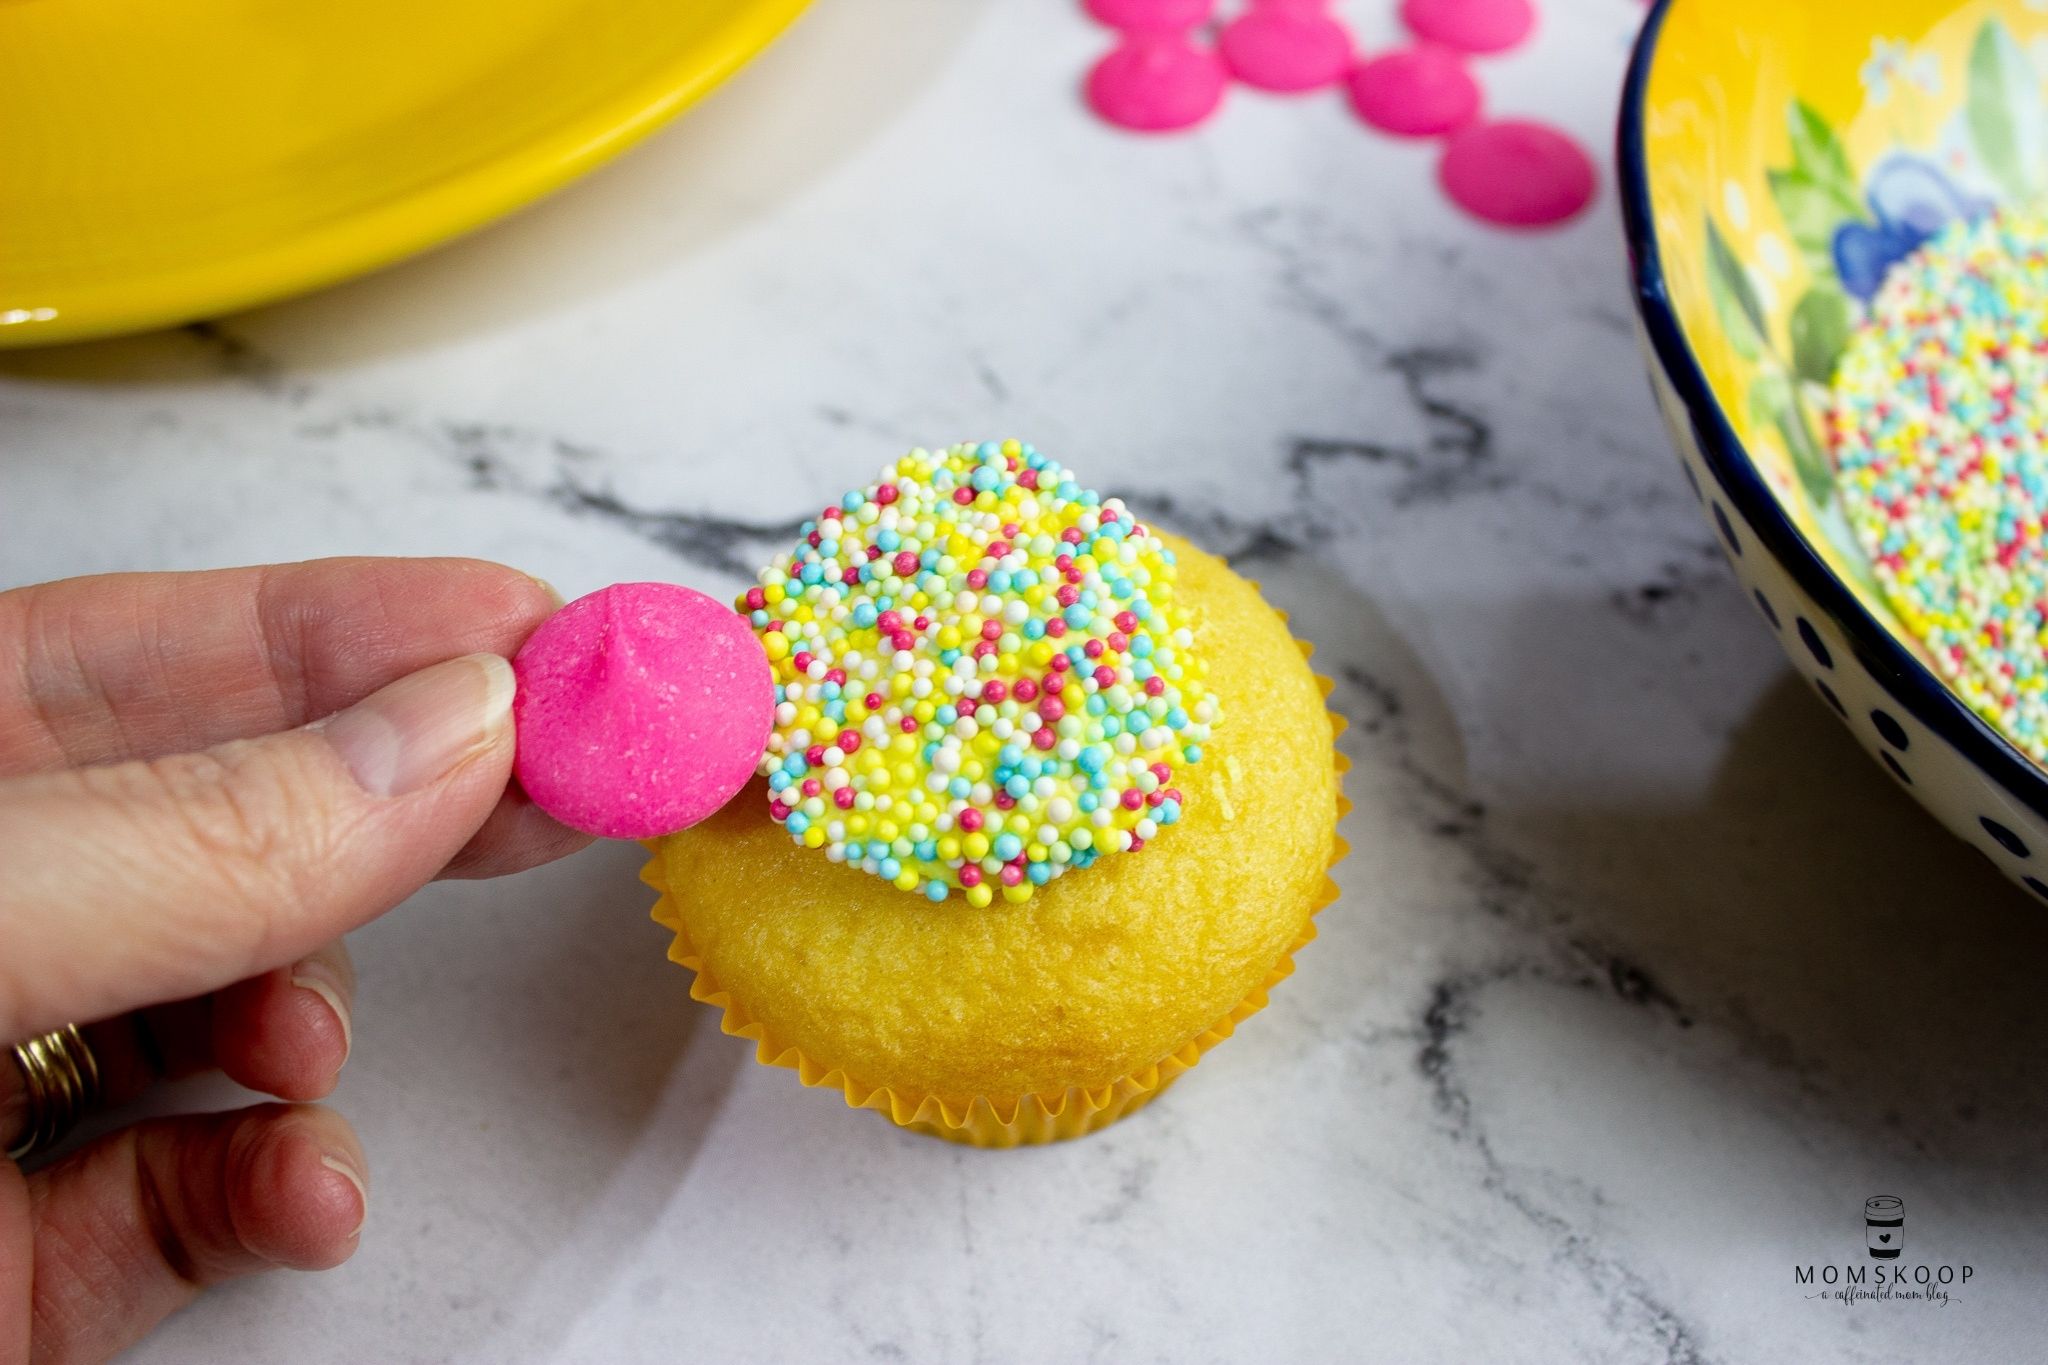 Adding a pink wafer onto the cupcake to make the daisy petals